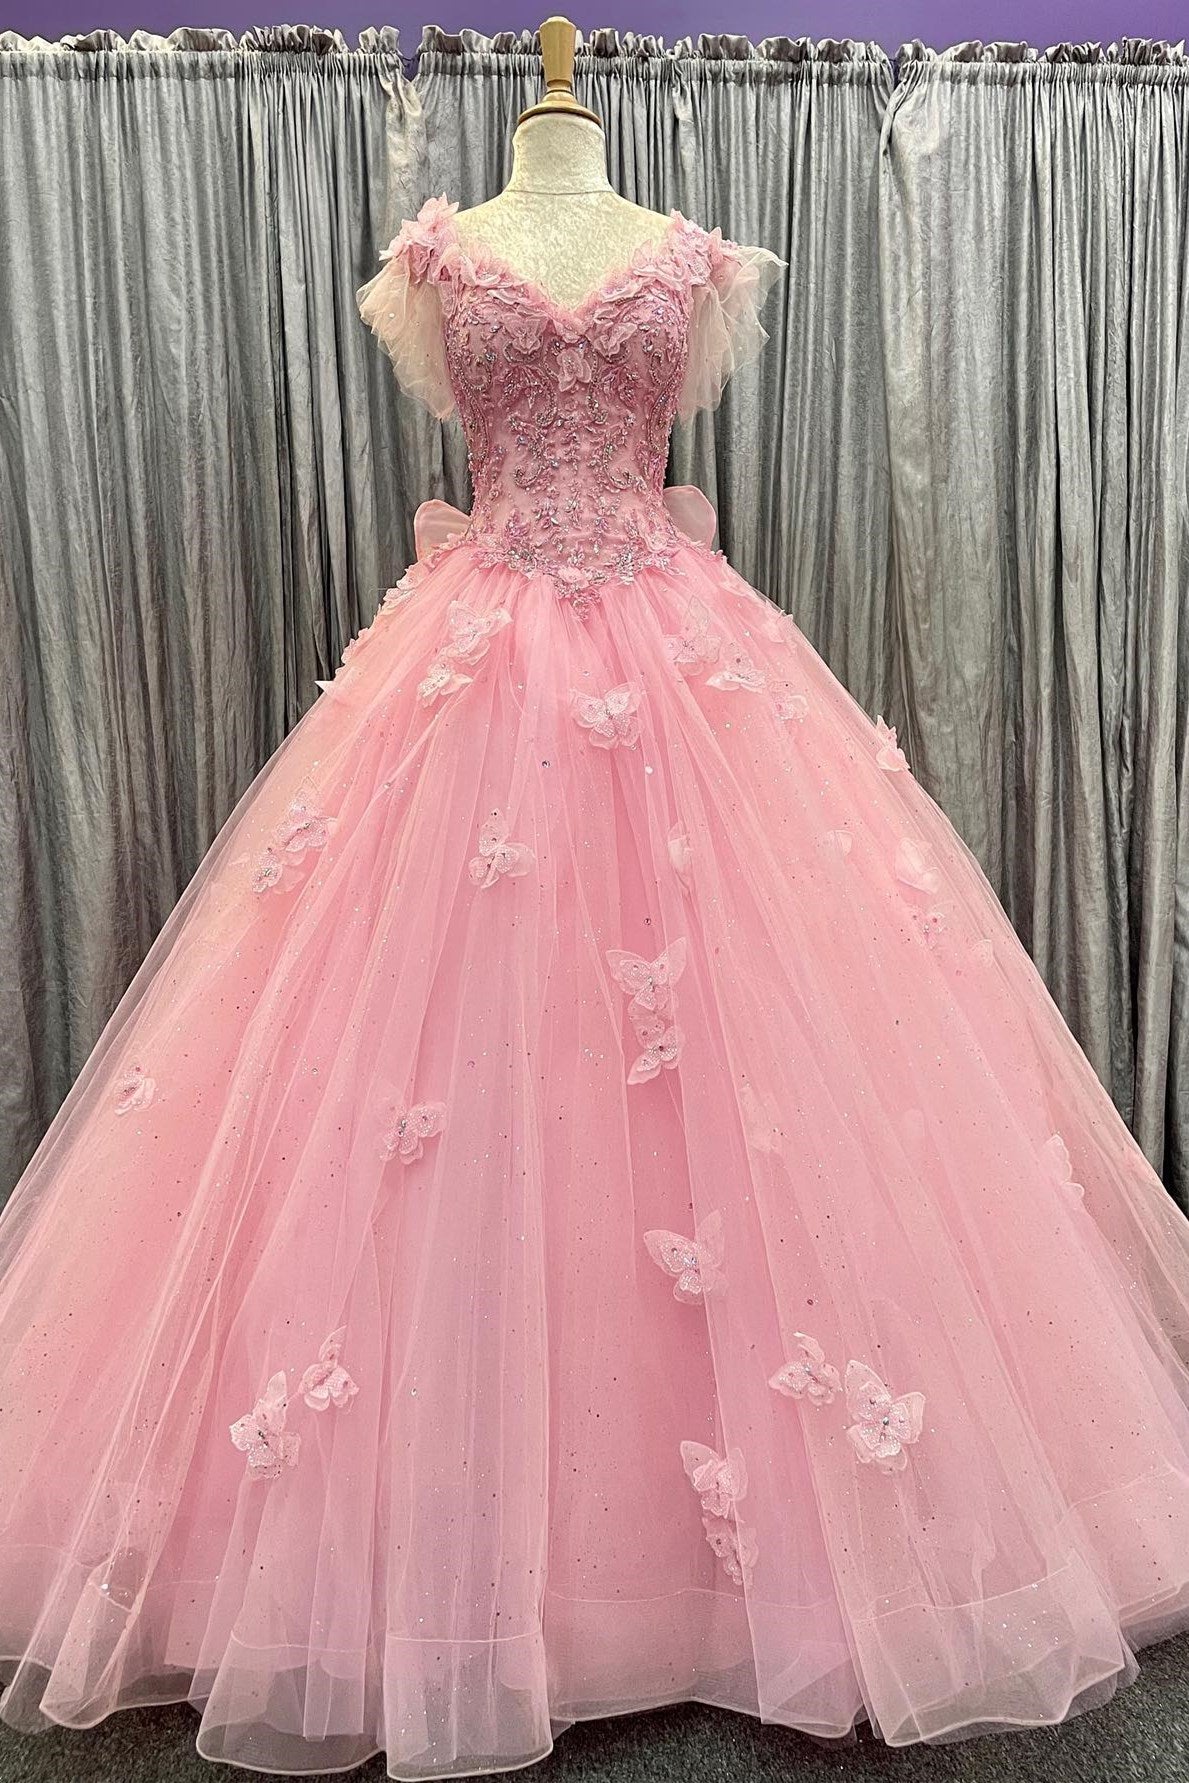 Quinceanera Dress Pink Tulle 3D Floral Lace Bow-Back Ball Gown with Flutter Sleeves